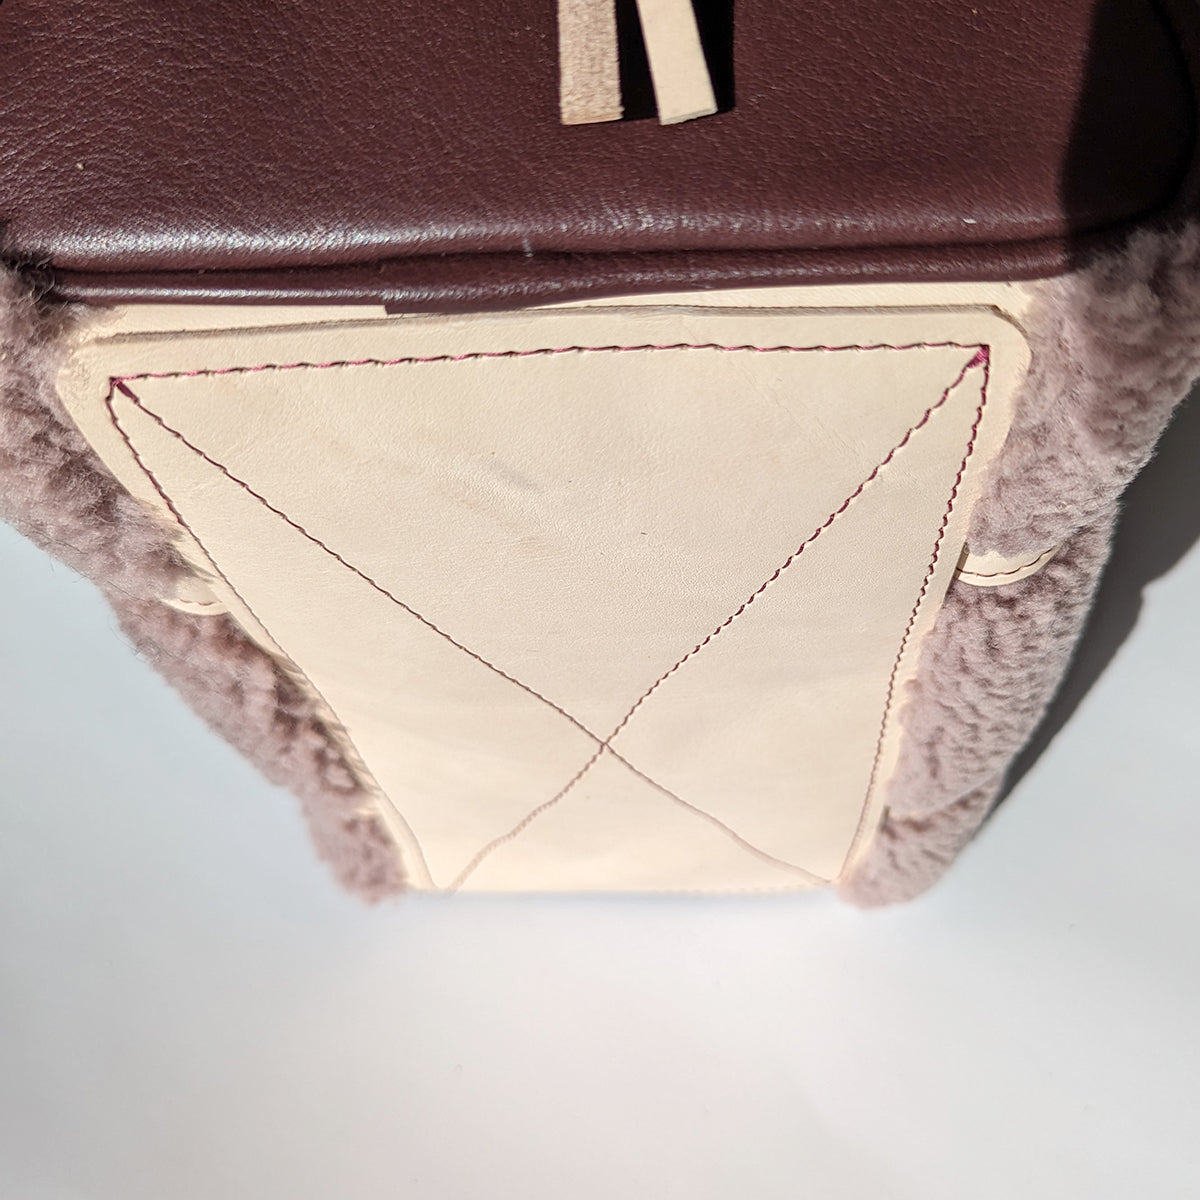 Mini Duffle in Lilac Shearling, Wine, and Vegetable Tanned Leather with Strap